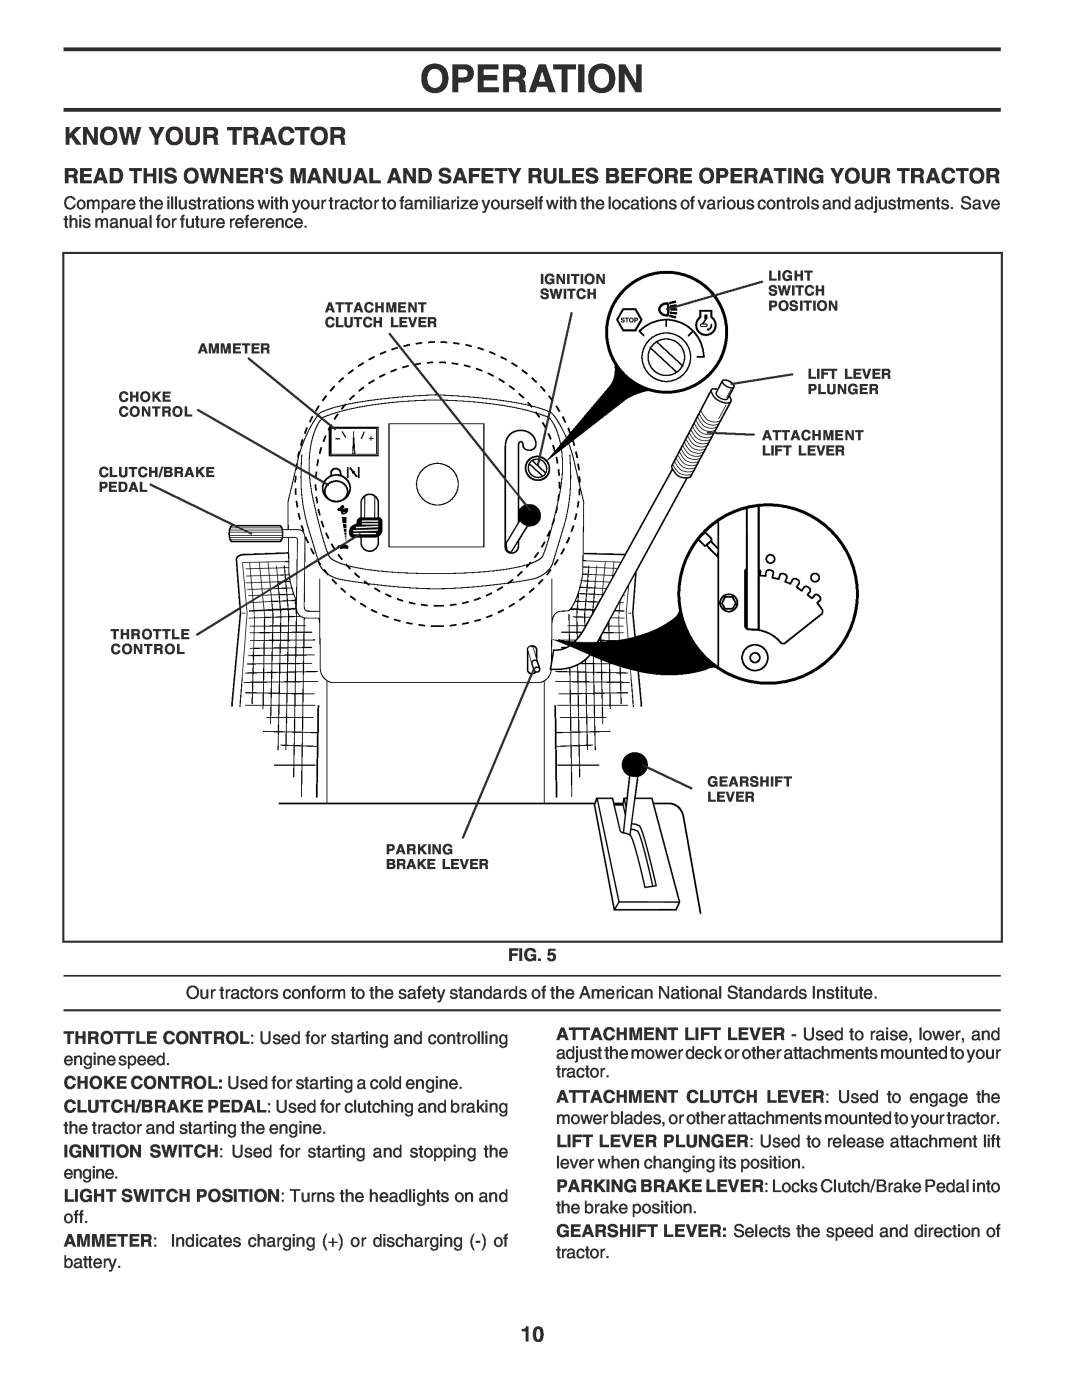 Poulan PR1842STD owner manual Know Your Tractor, Operation 